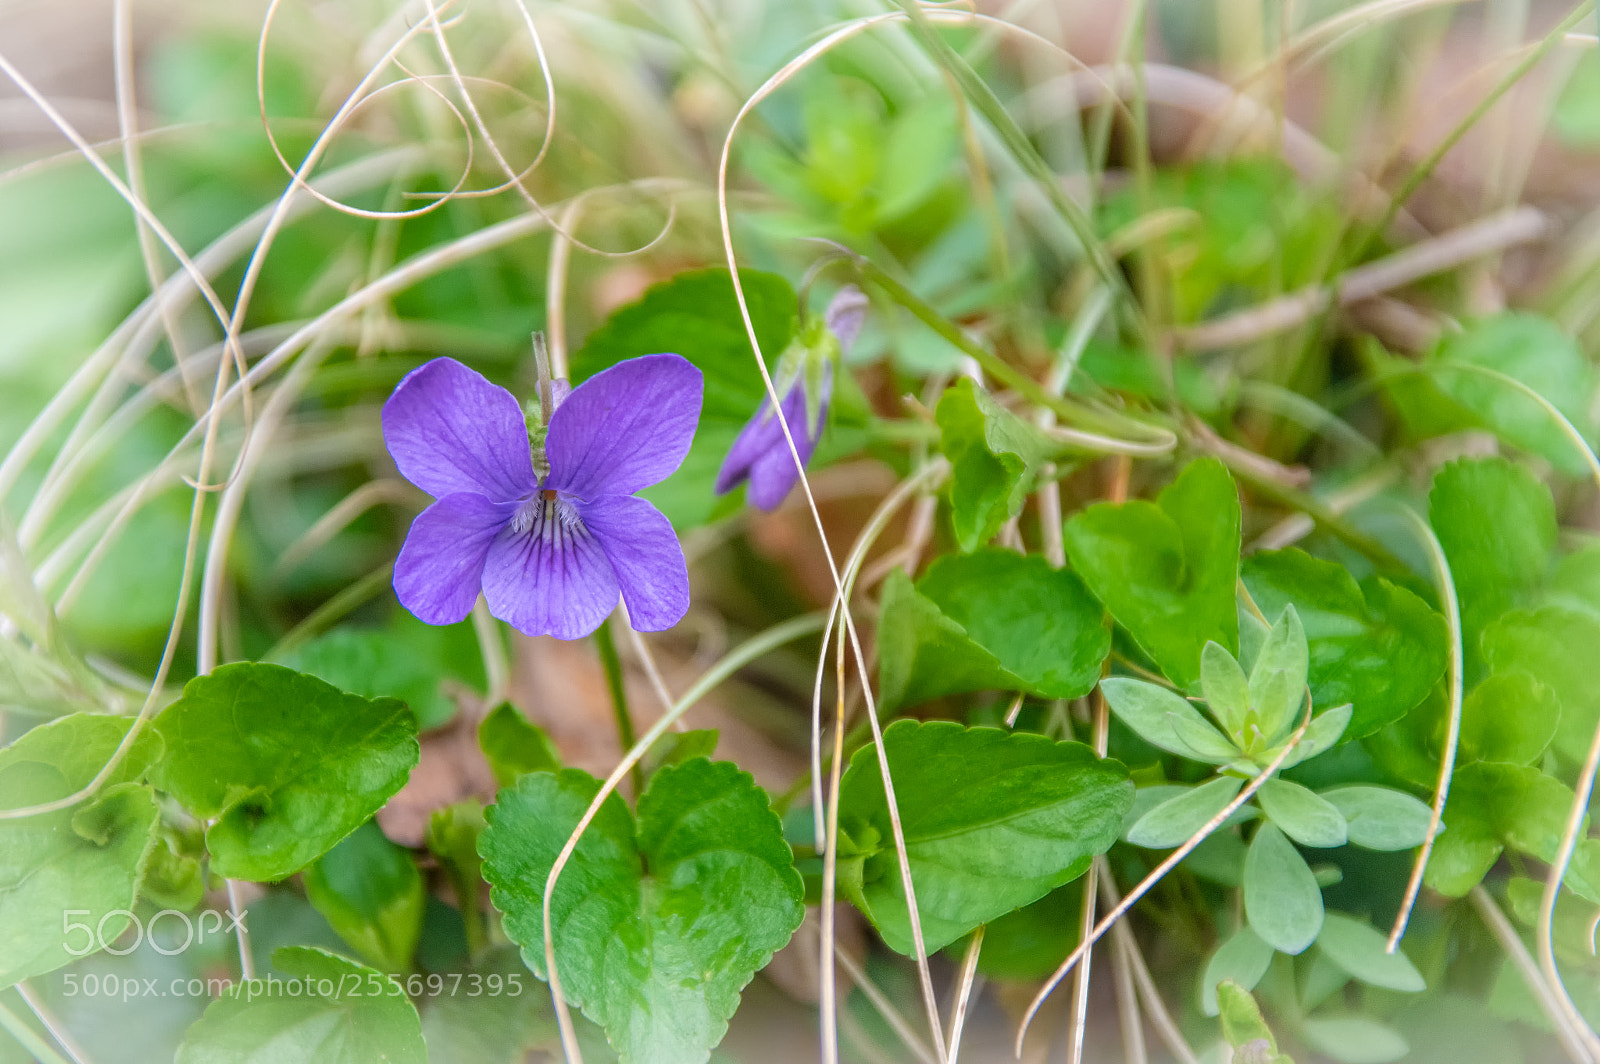 Pentax K-3 sample photo. Where the wild violet photography